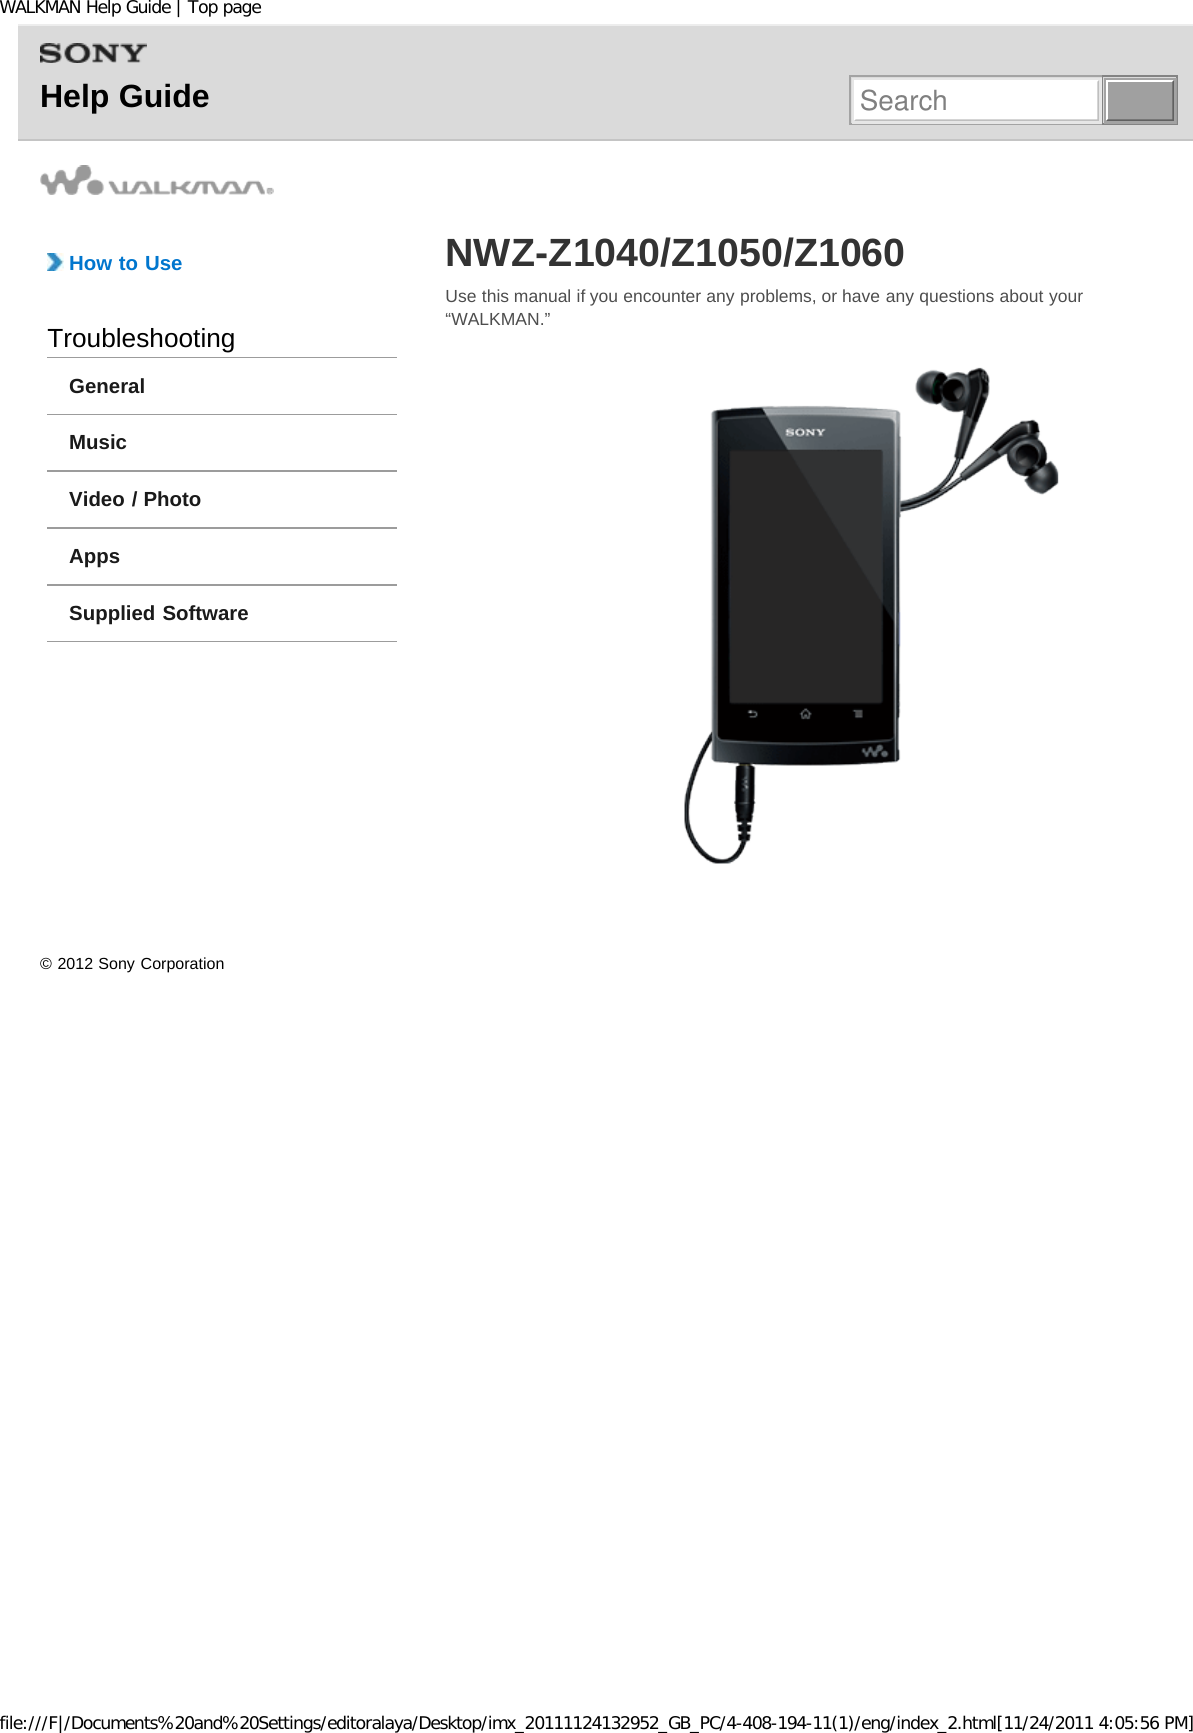 Page 14 of Sony Group NWZZ1000 Digital Media Player User Manual WALKMAN Help Guide   Top page